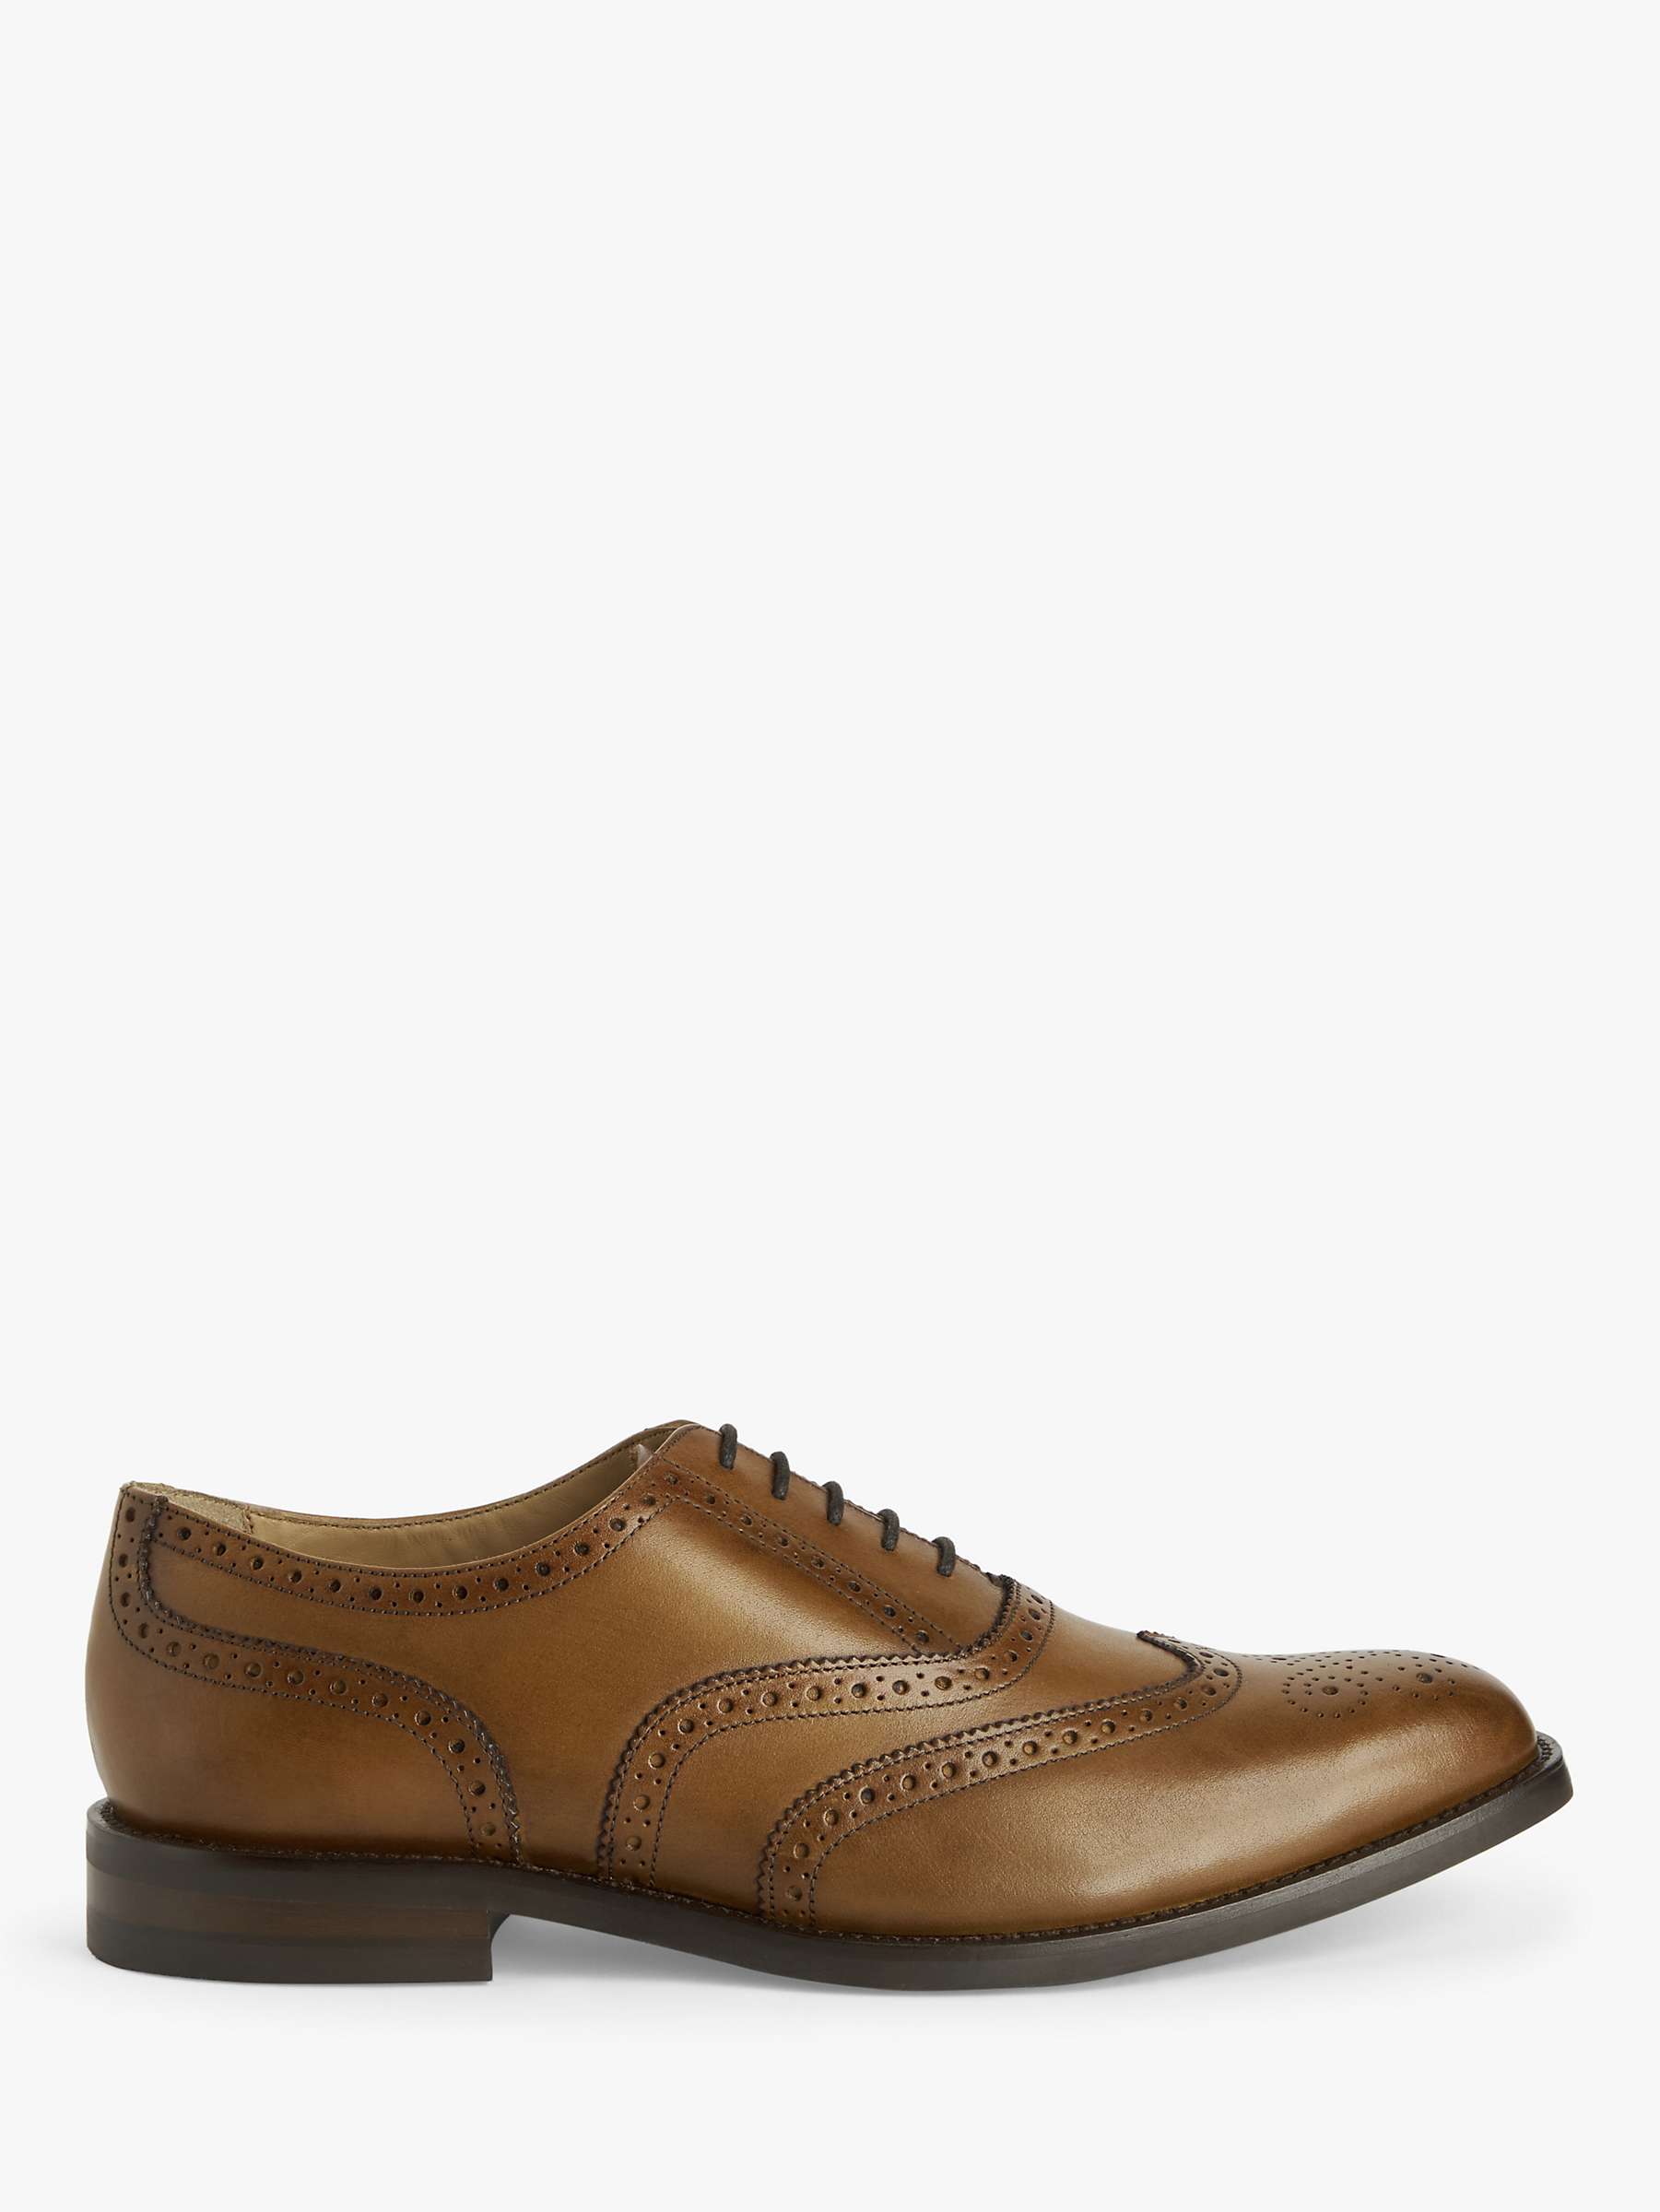 Buy John Lewis Leather Perforated Brogues Online at johnlewis.com